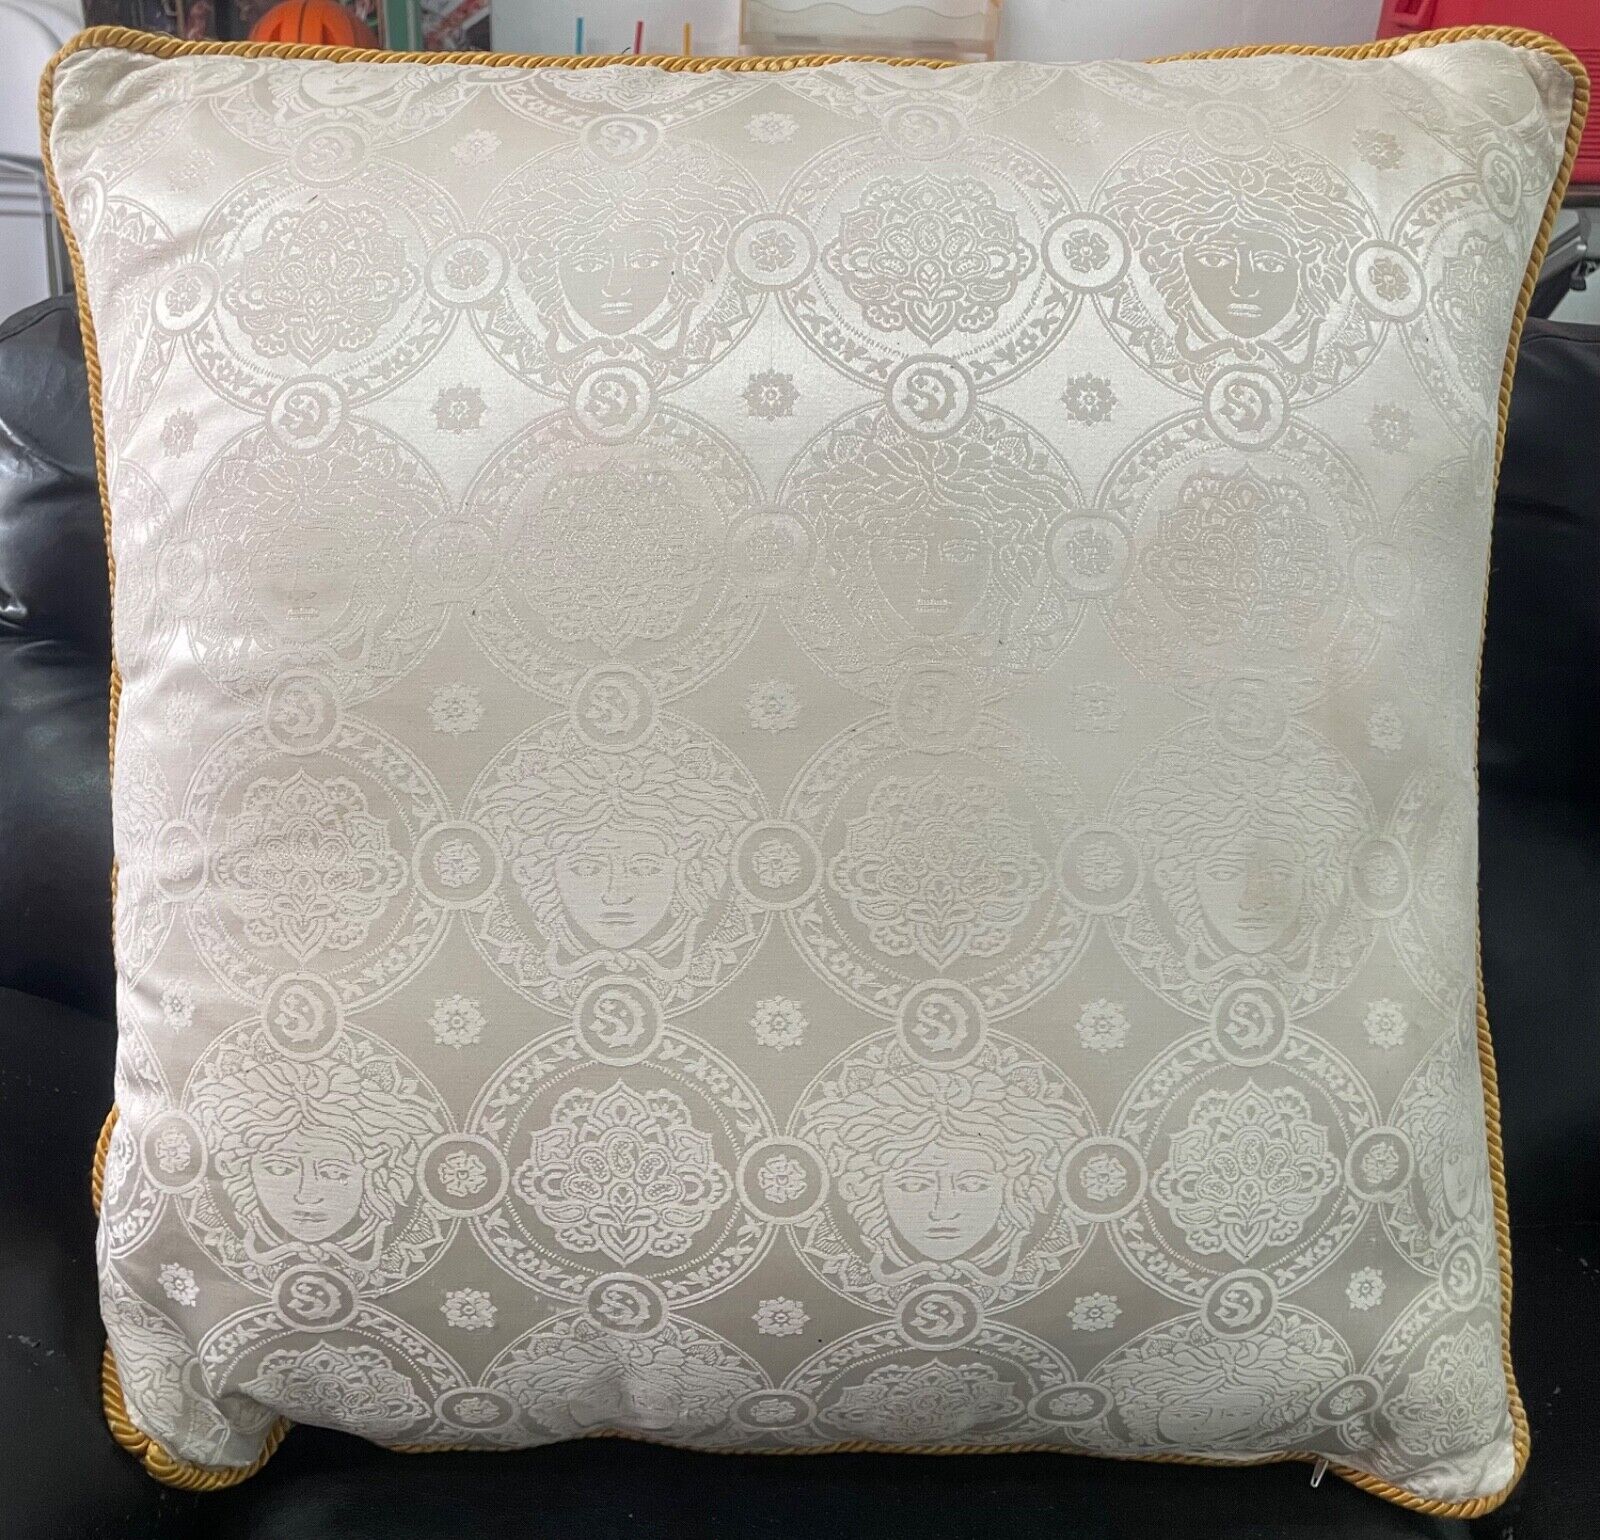 RARE VINTAGE GIANNI VERSACE SILK PILLOW 24 X 24 INCHES 10 INCHES THICK DESIGNER